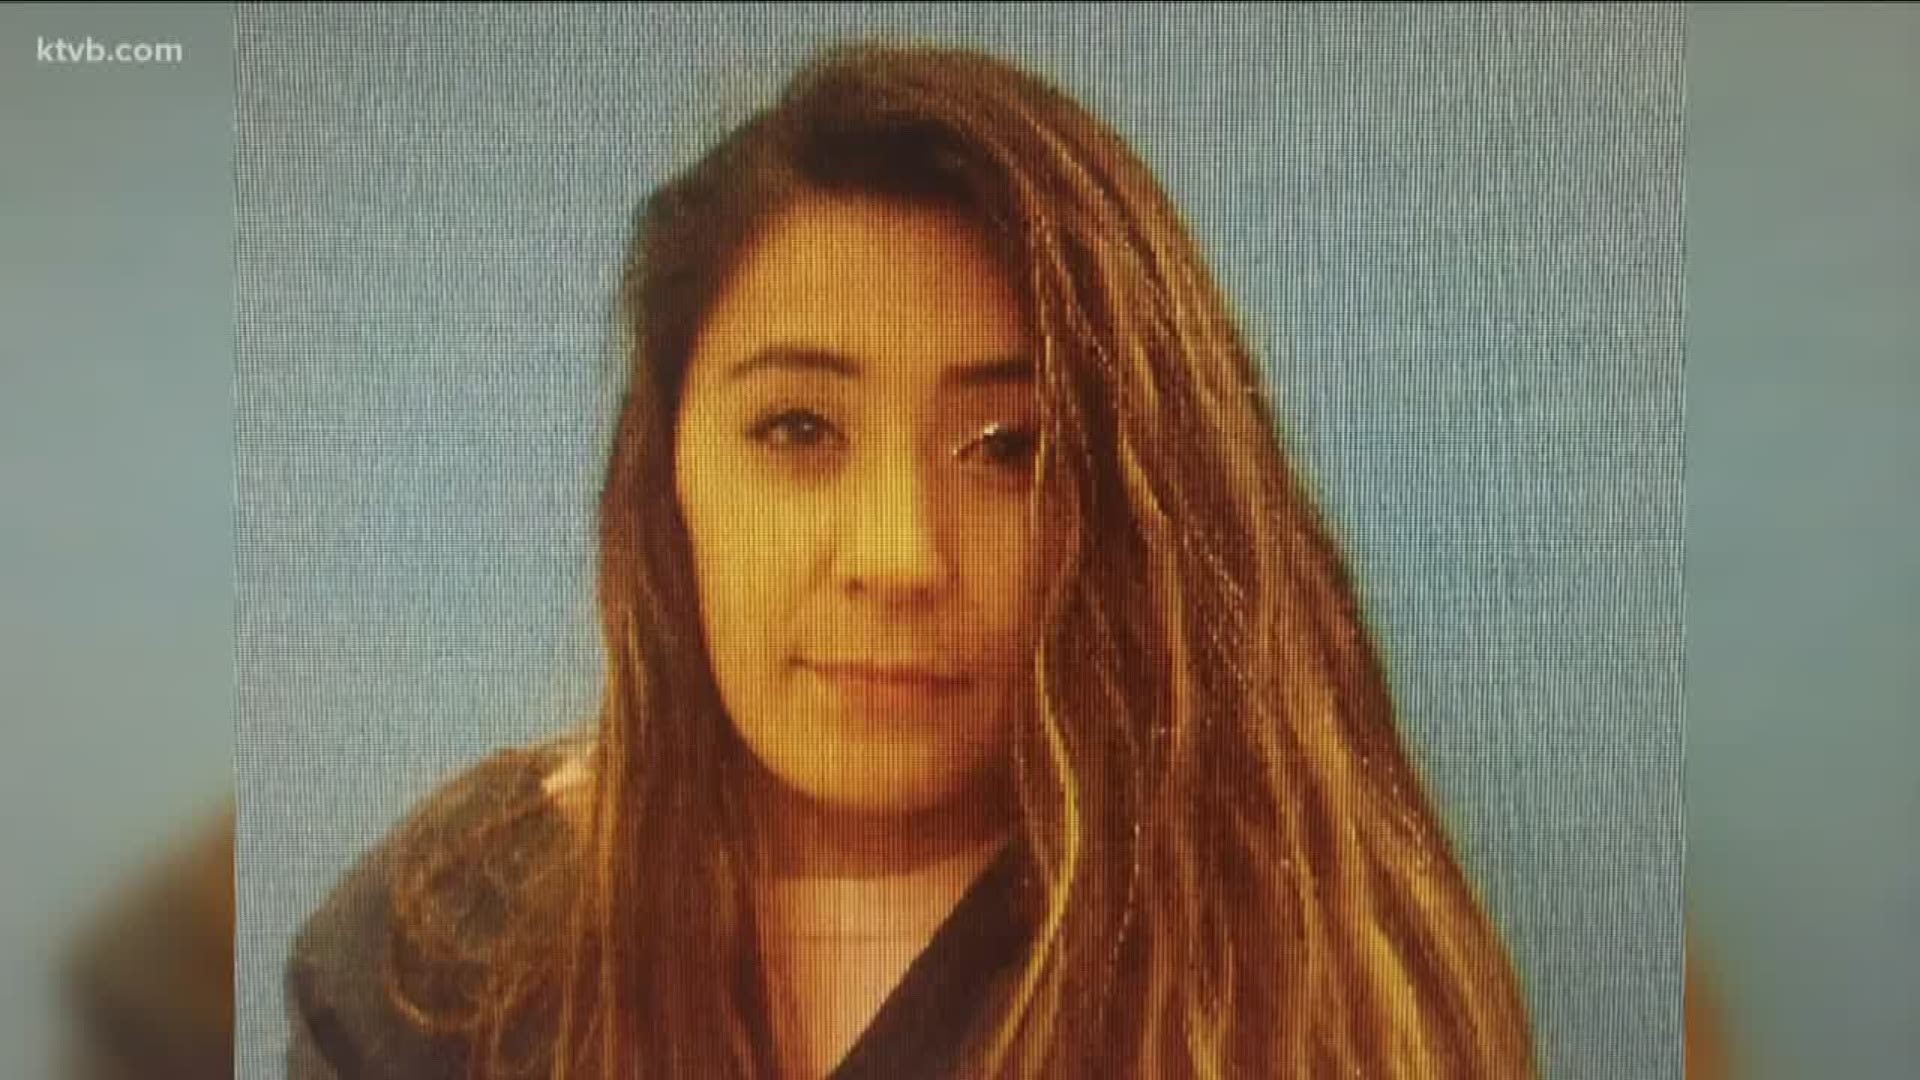 Police say Eden Hope Rodriguez of Segiun, Texas tried to kidnap her 8-year-old child, but the legal guardian was able to wrestle the child free and they fled inside the church. Rodriguez then ran away from the church. Police say they arrested her at the office of her attorney that is involved in her ongoing child custody case over the child that she attempted to abduct.